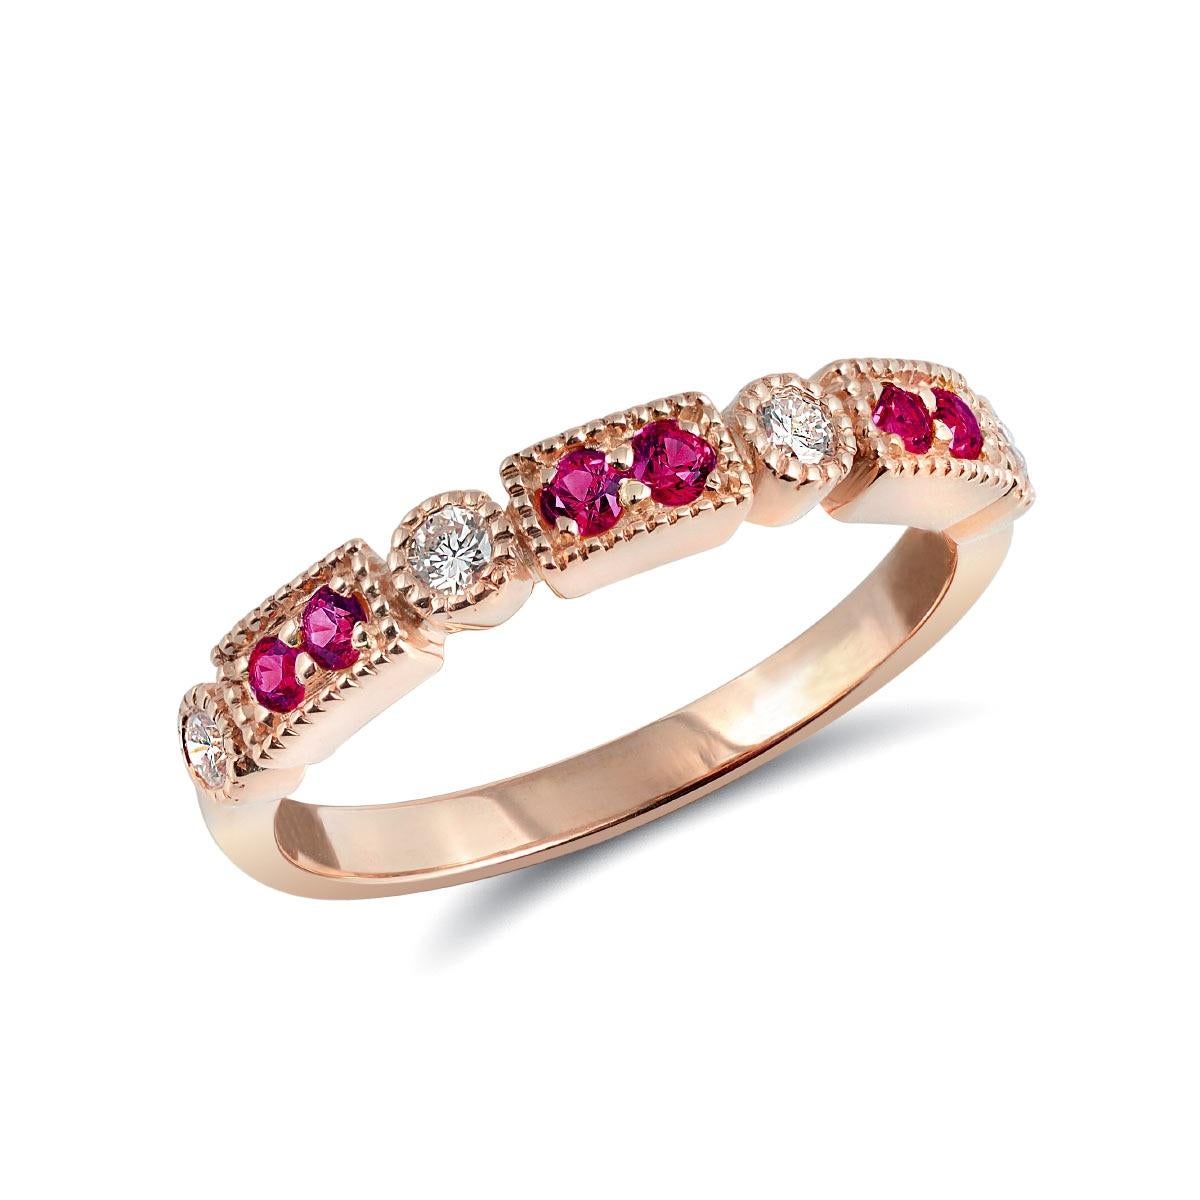 0.21 Carats Pink Sapphires Diamonds set in 14K Rose Gold Stackable Ring In New Condition For Sale In Los Angeles, CA